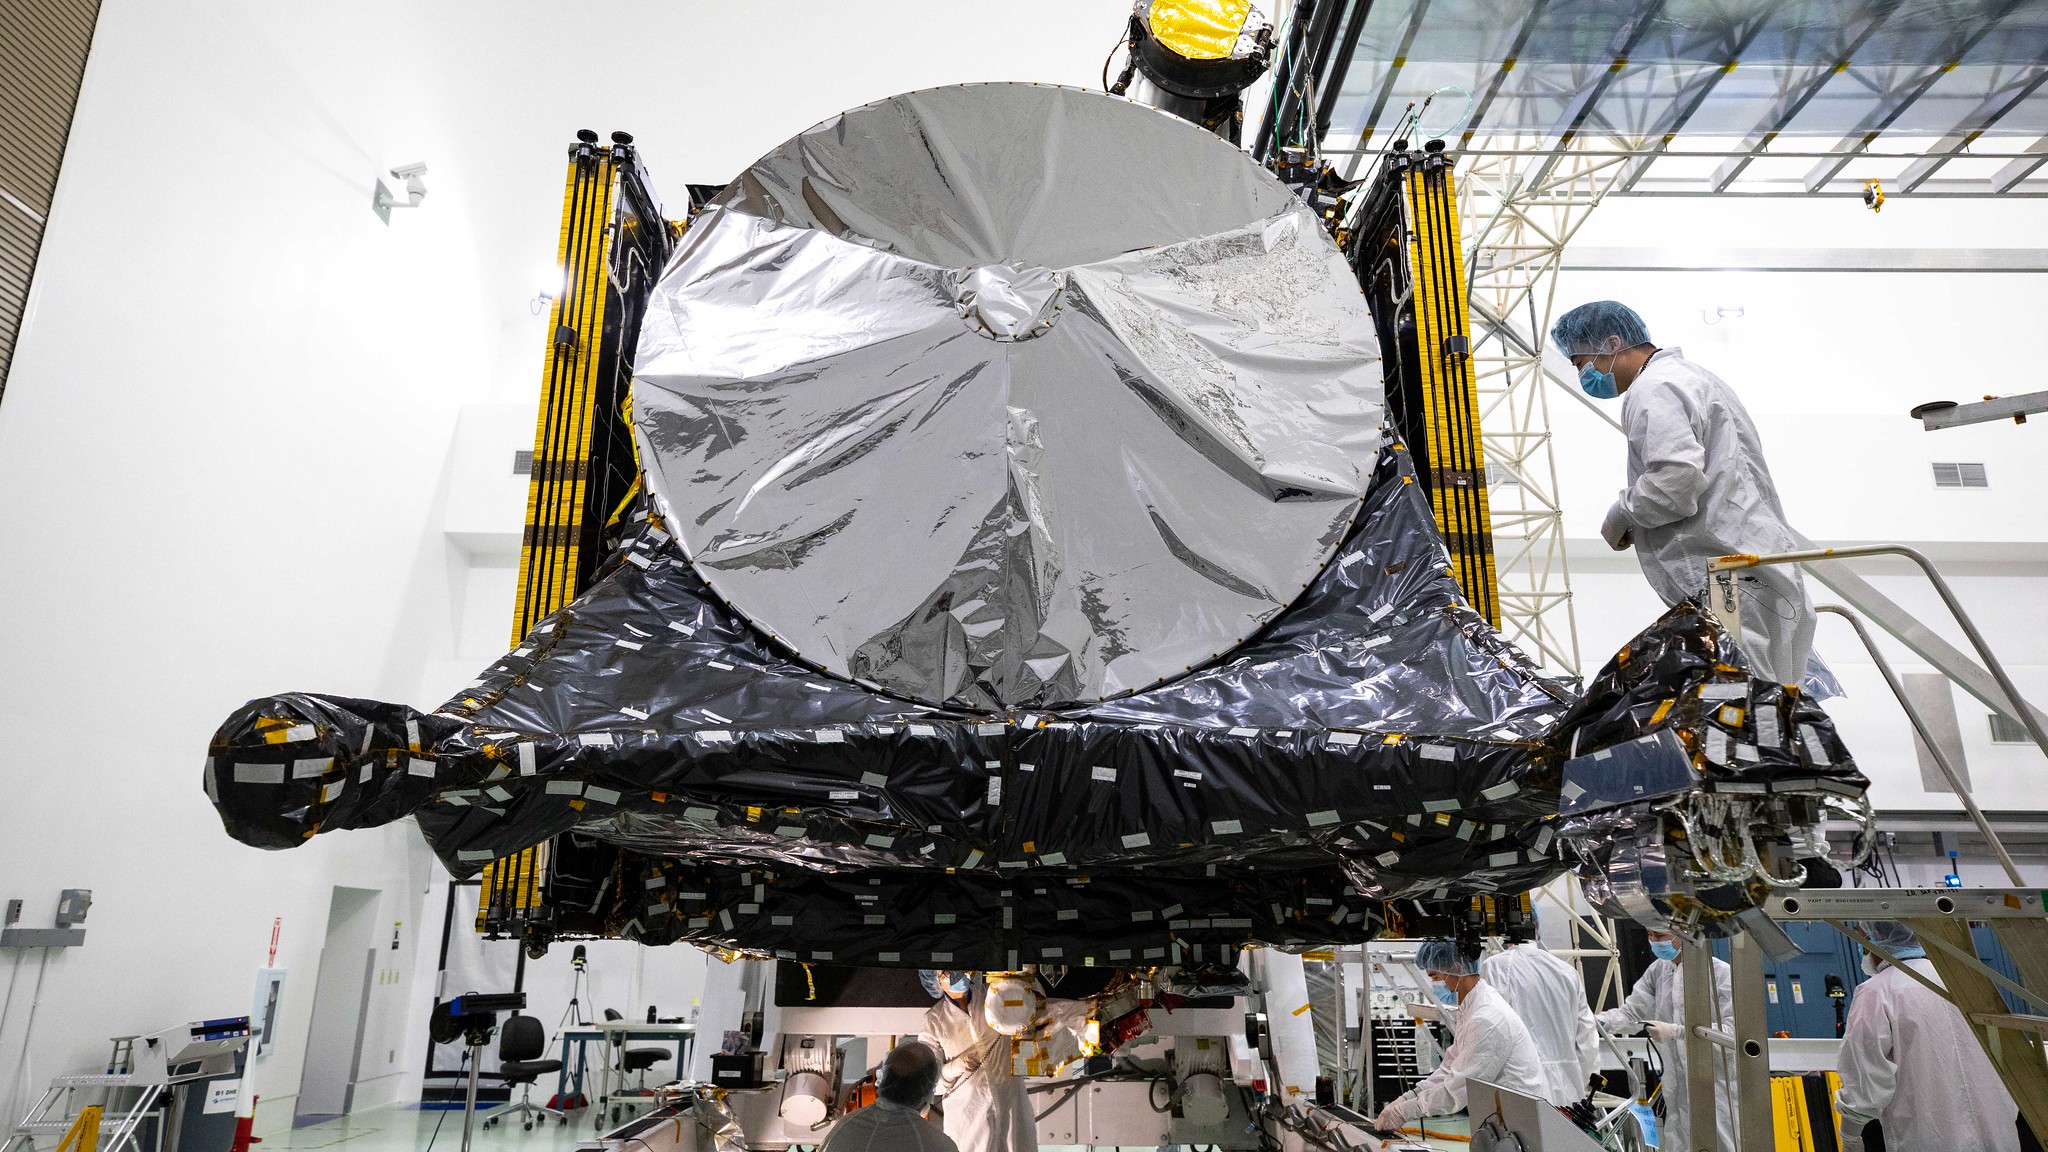 Here, Psyche mission team members prepare the spacecraft at a facility near NASA’s Kennedy Space Center in Florida in late July, just after the solar arrays were folded and stowed.